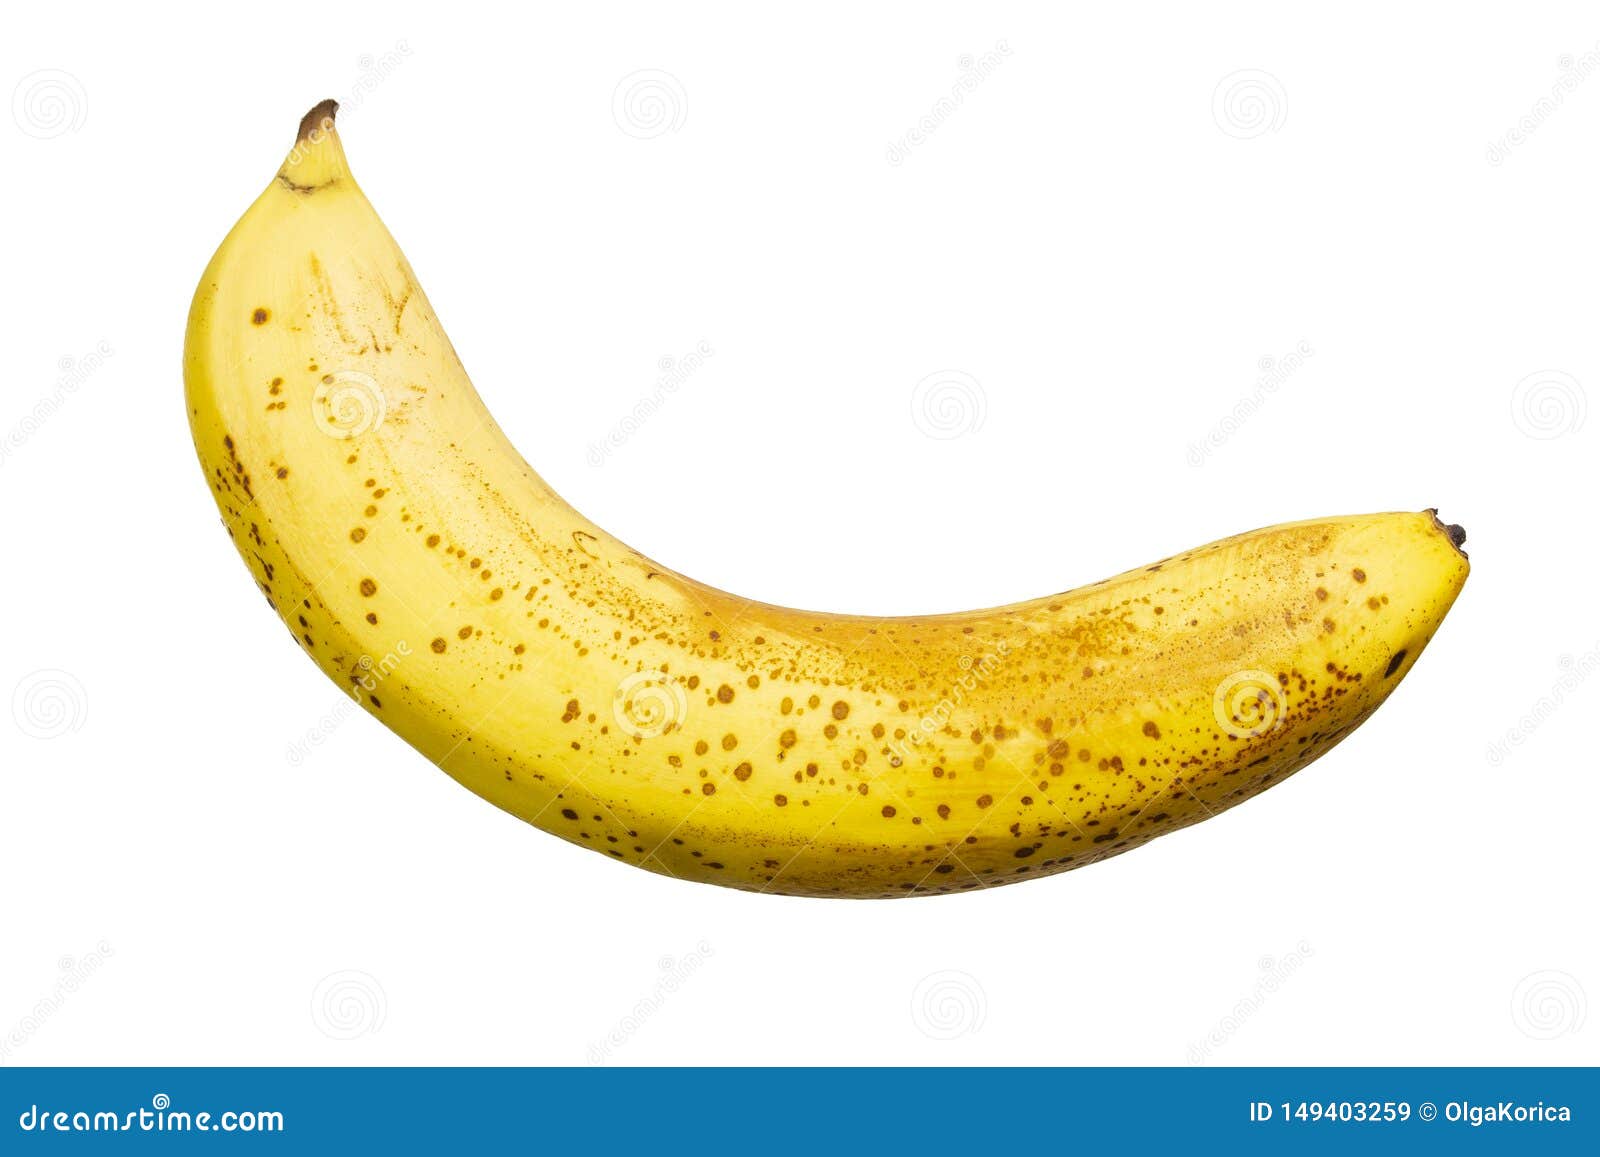 Banana Overripe Yellow with Specks on a White Background, Isolate ...